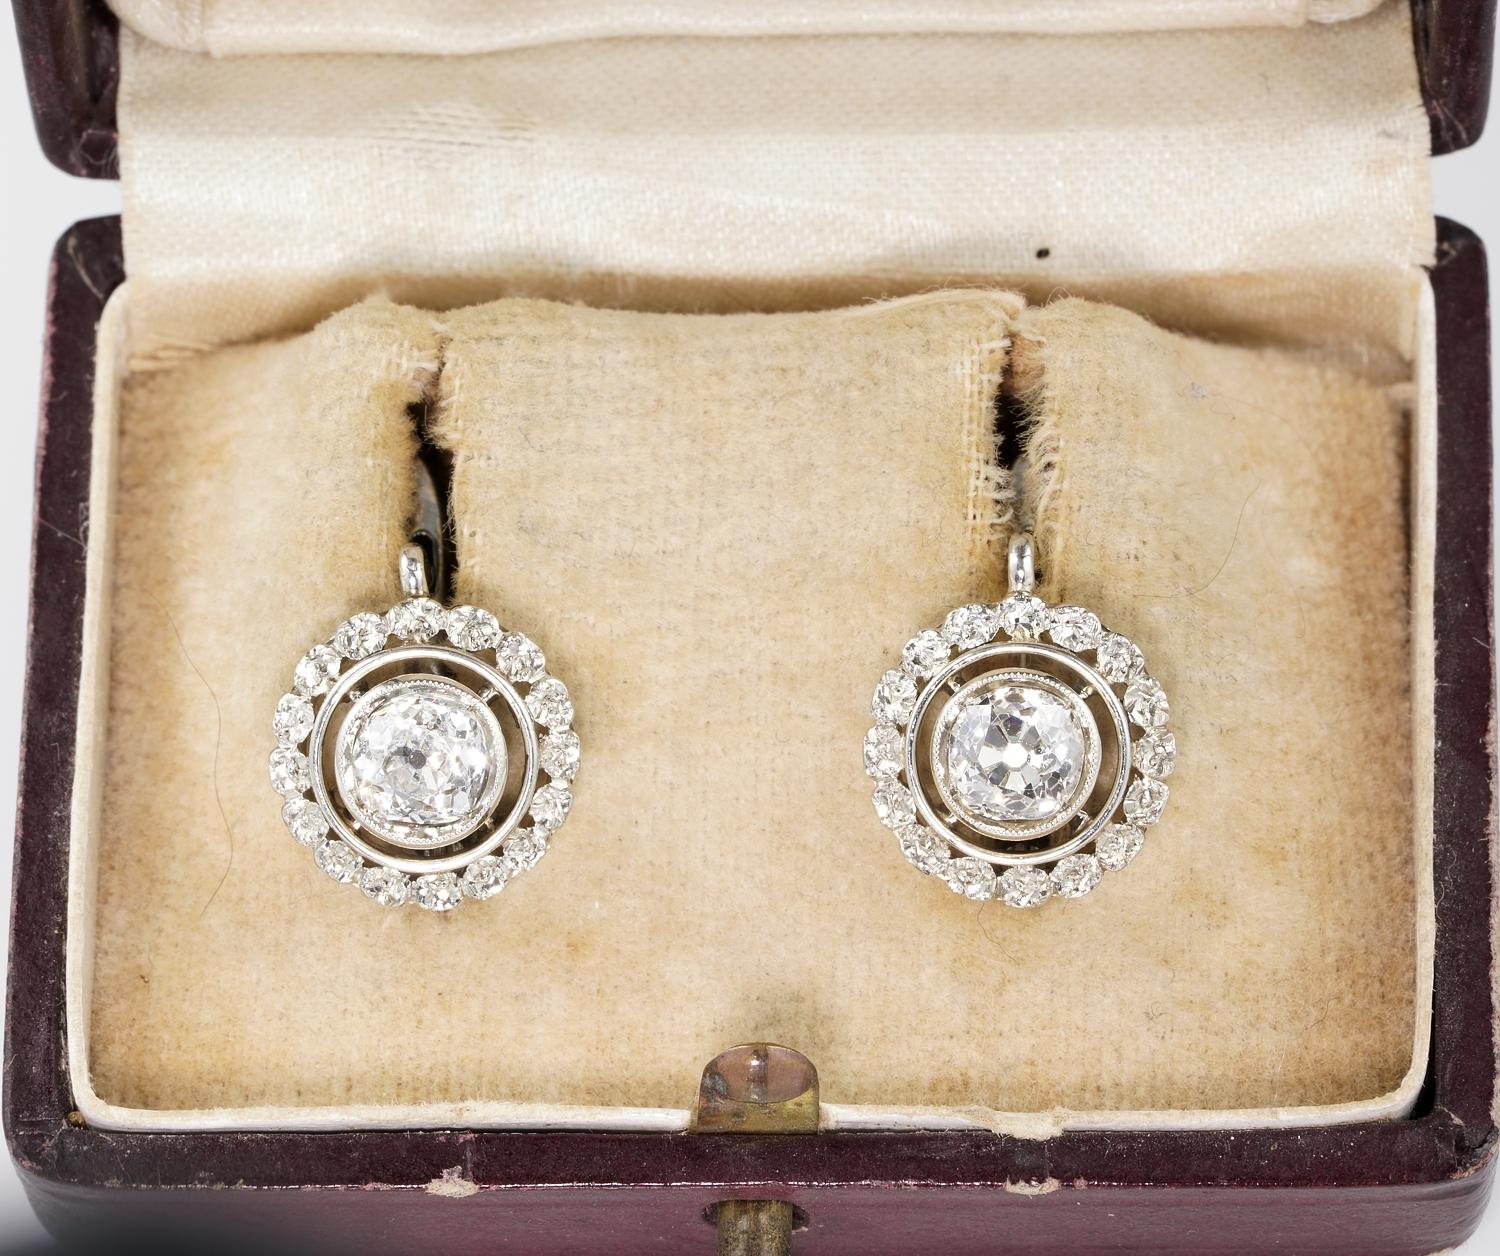 The Antique Charm perfect for everyday!
Stunning floret design authentic Edwardian Diamond solitaire ear lobe earrings
The perfect ones to have always on day night
Gorgeous target design for the main Diamond bordered by a charming engraved frame of